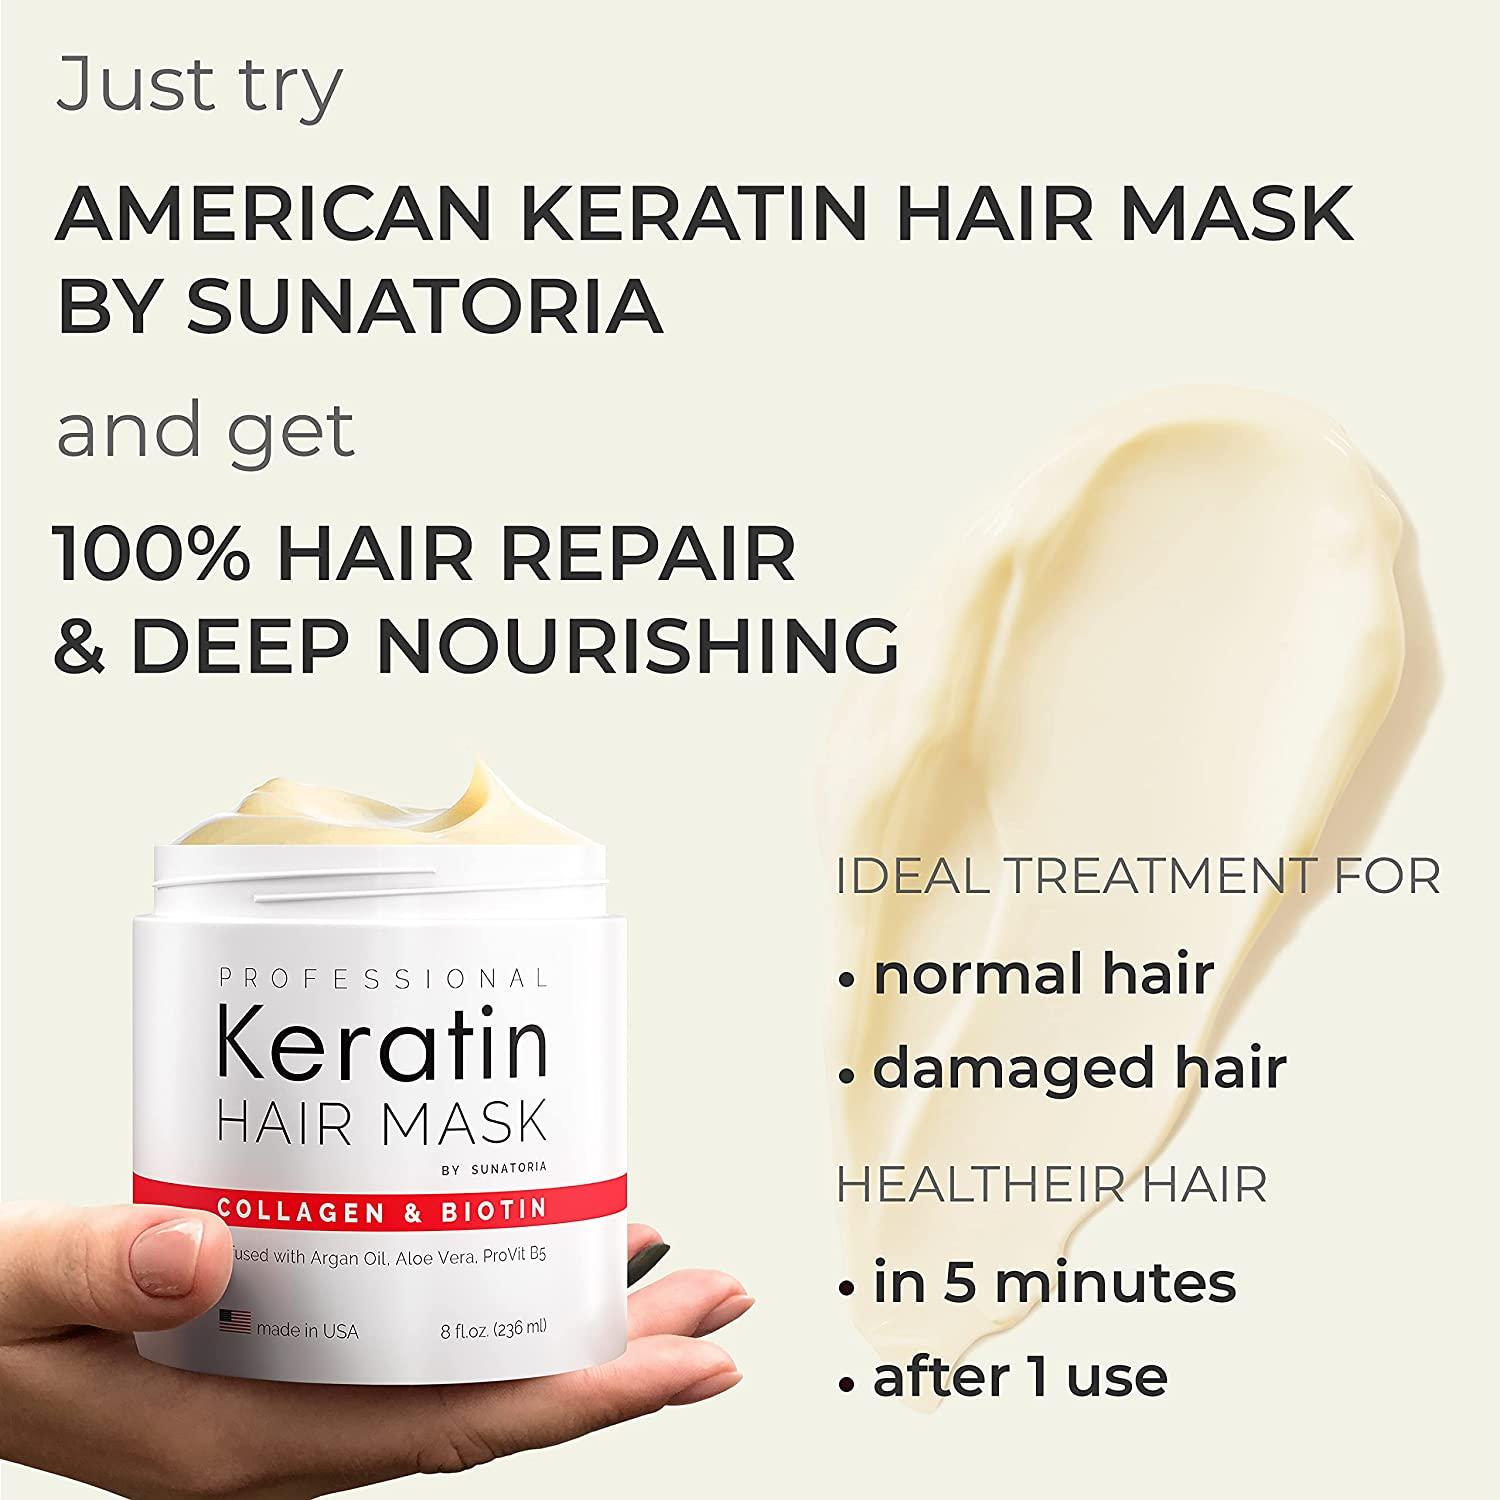 Professional Keratin Hair Mask - Made in USA - Nourishment Treatment for  Hair Repair & Beauty - Biotin Collagen Coconut Oil & Pro-Vitamin B5 Protein  Mask - Hair Vitamin Complex for All Hair Types